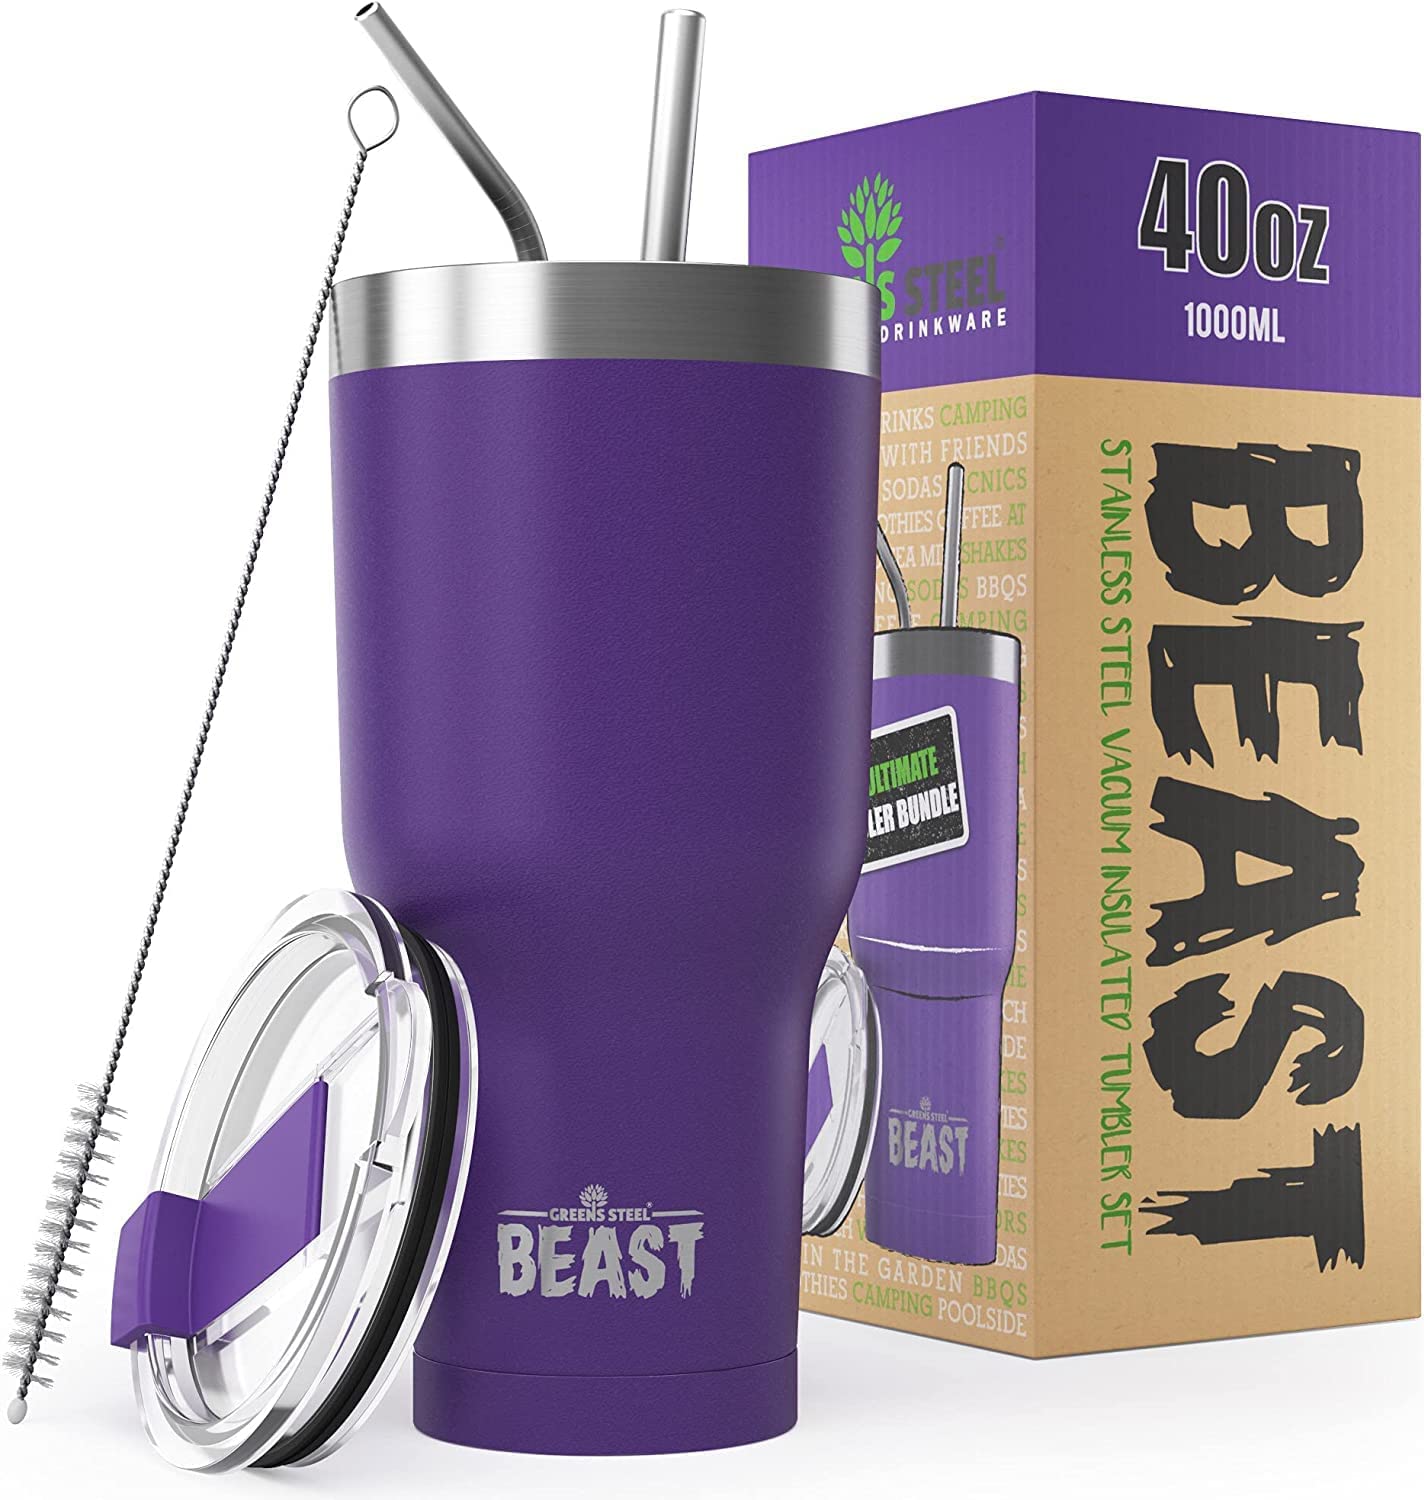 Cup　Tumbler　Wall　Vacuum　Coffee　Insulated　Flask　Double　oz　Steel　Beast　Travel　Ice　40　Stainless　(Purple)